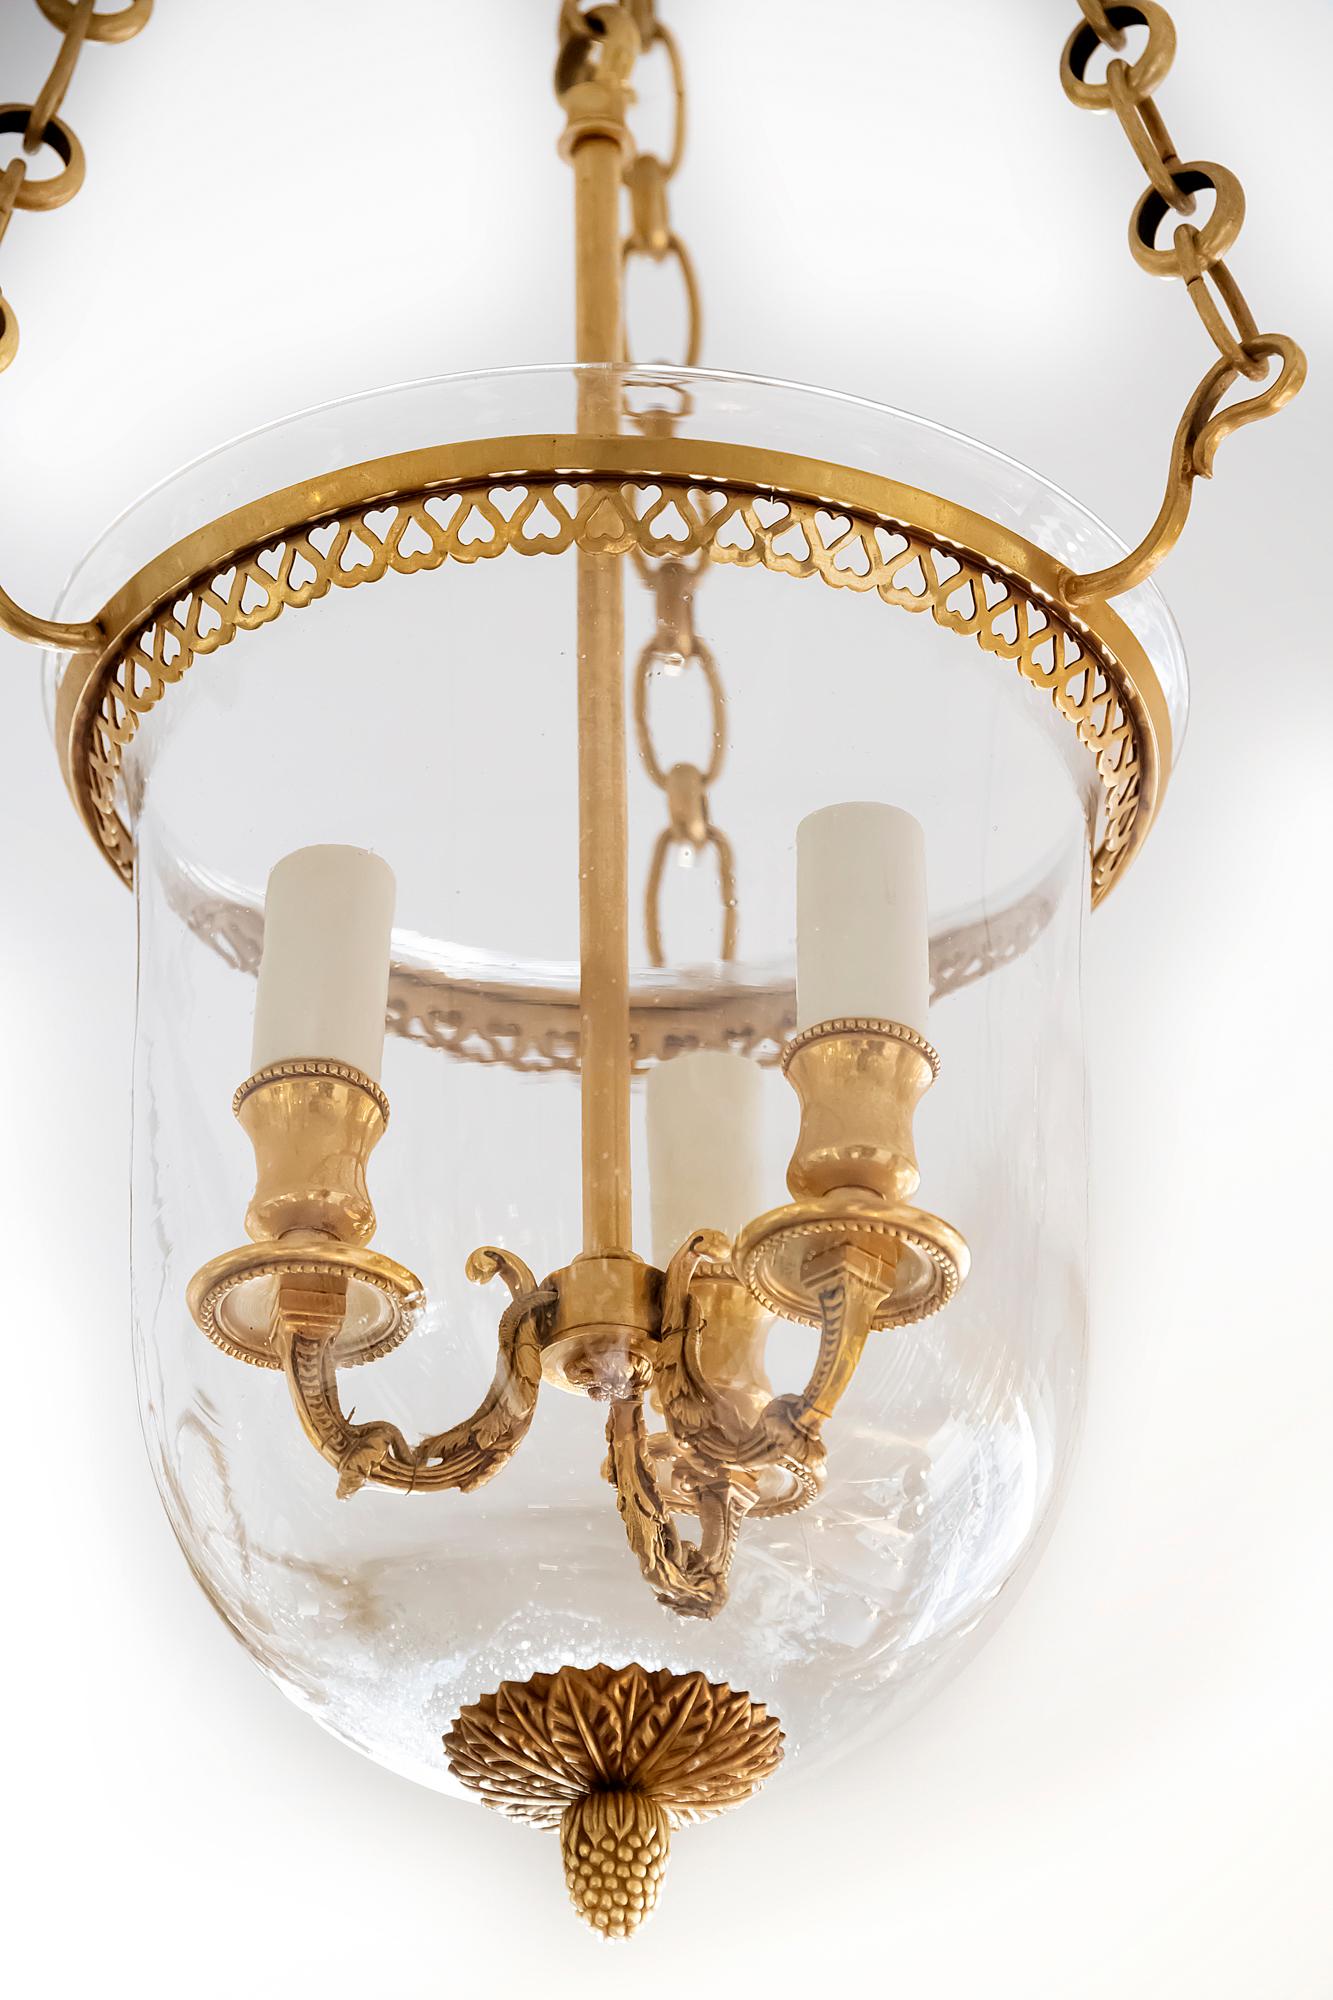 French chandelier lantern is made of bronze with glass base.
This chandelier includes 3 pieces. E14 bulbs.

It is in a very good original vintage condition.

 